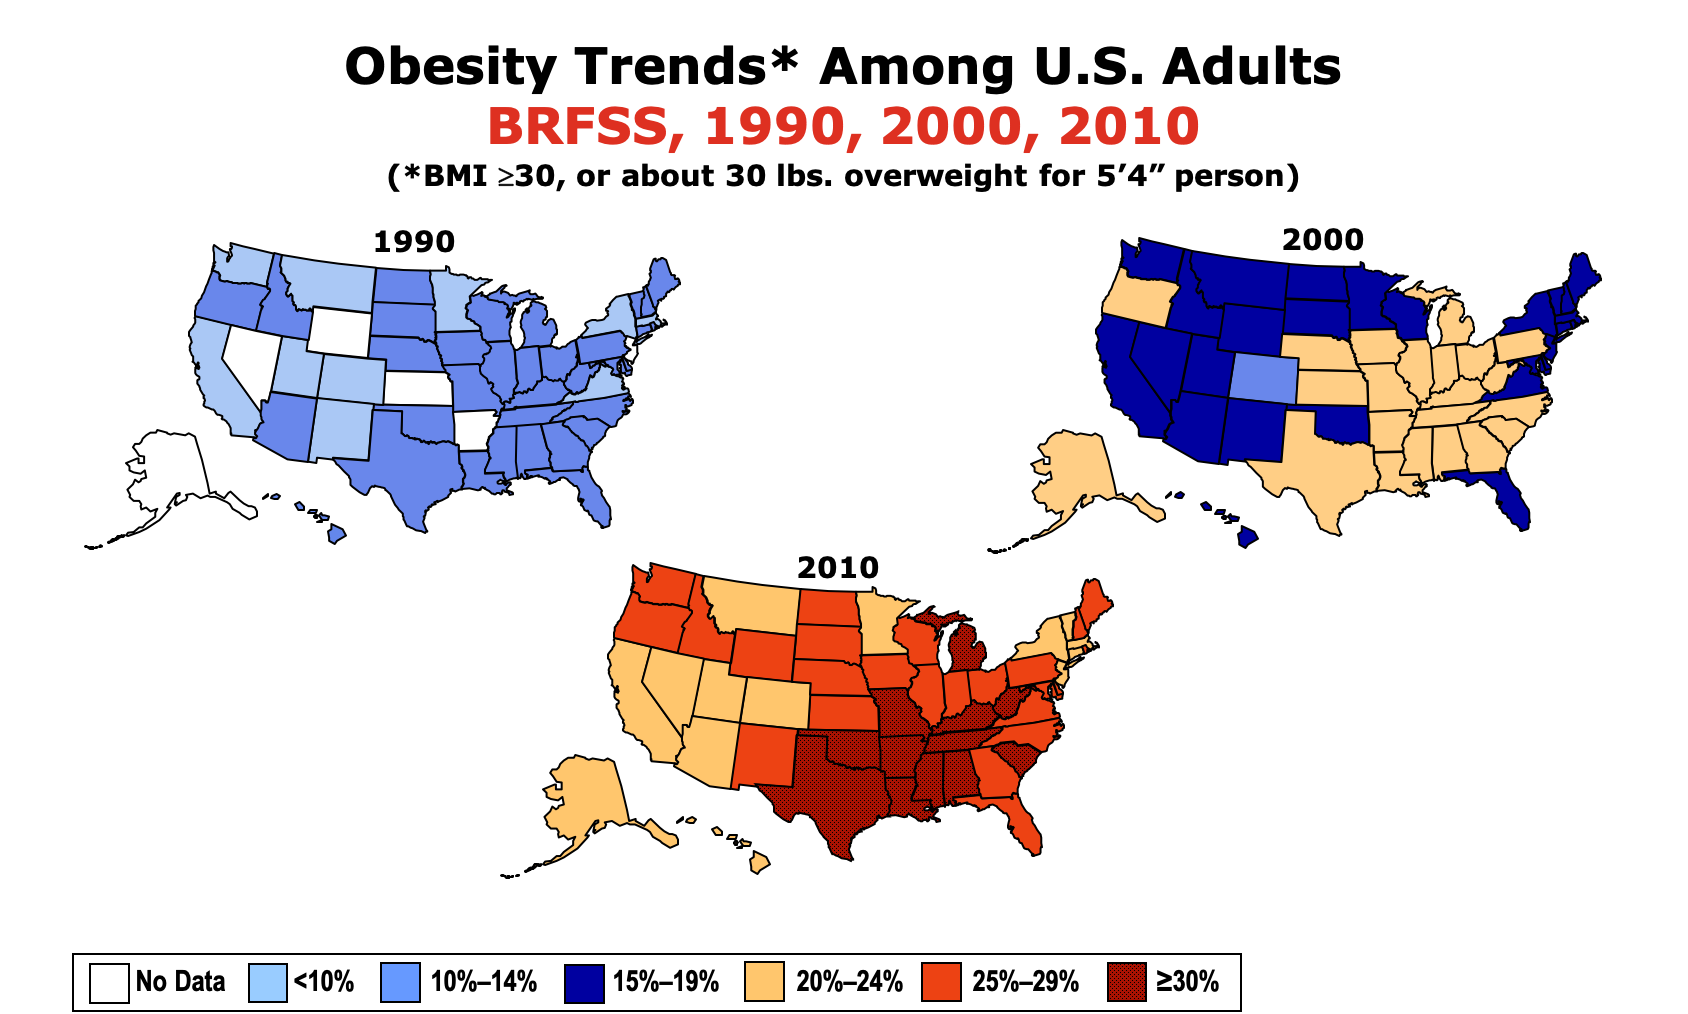 The figure shows three maps of the U.S. with states color-coded based on the percent of the their population estimated to be obese. In 1990, all of the states are a blue color, indicating 10-14 percent of their populations were obese. In 2000, many states are a darker blue color, indicating 15-19 percent obesity, and about half of a beige color, indicating 20 to 24 percent obesity. In 2010, there are still some beige states but no blue ones, and many are orange or red, indicating 25 to 30+ percent obesity.